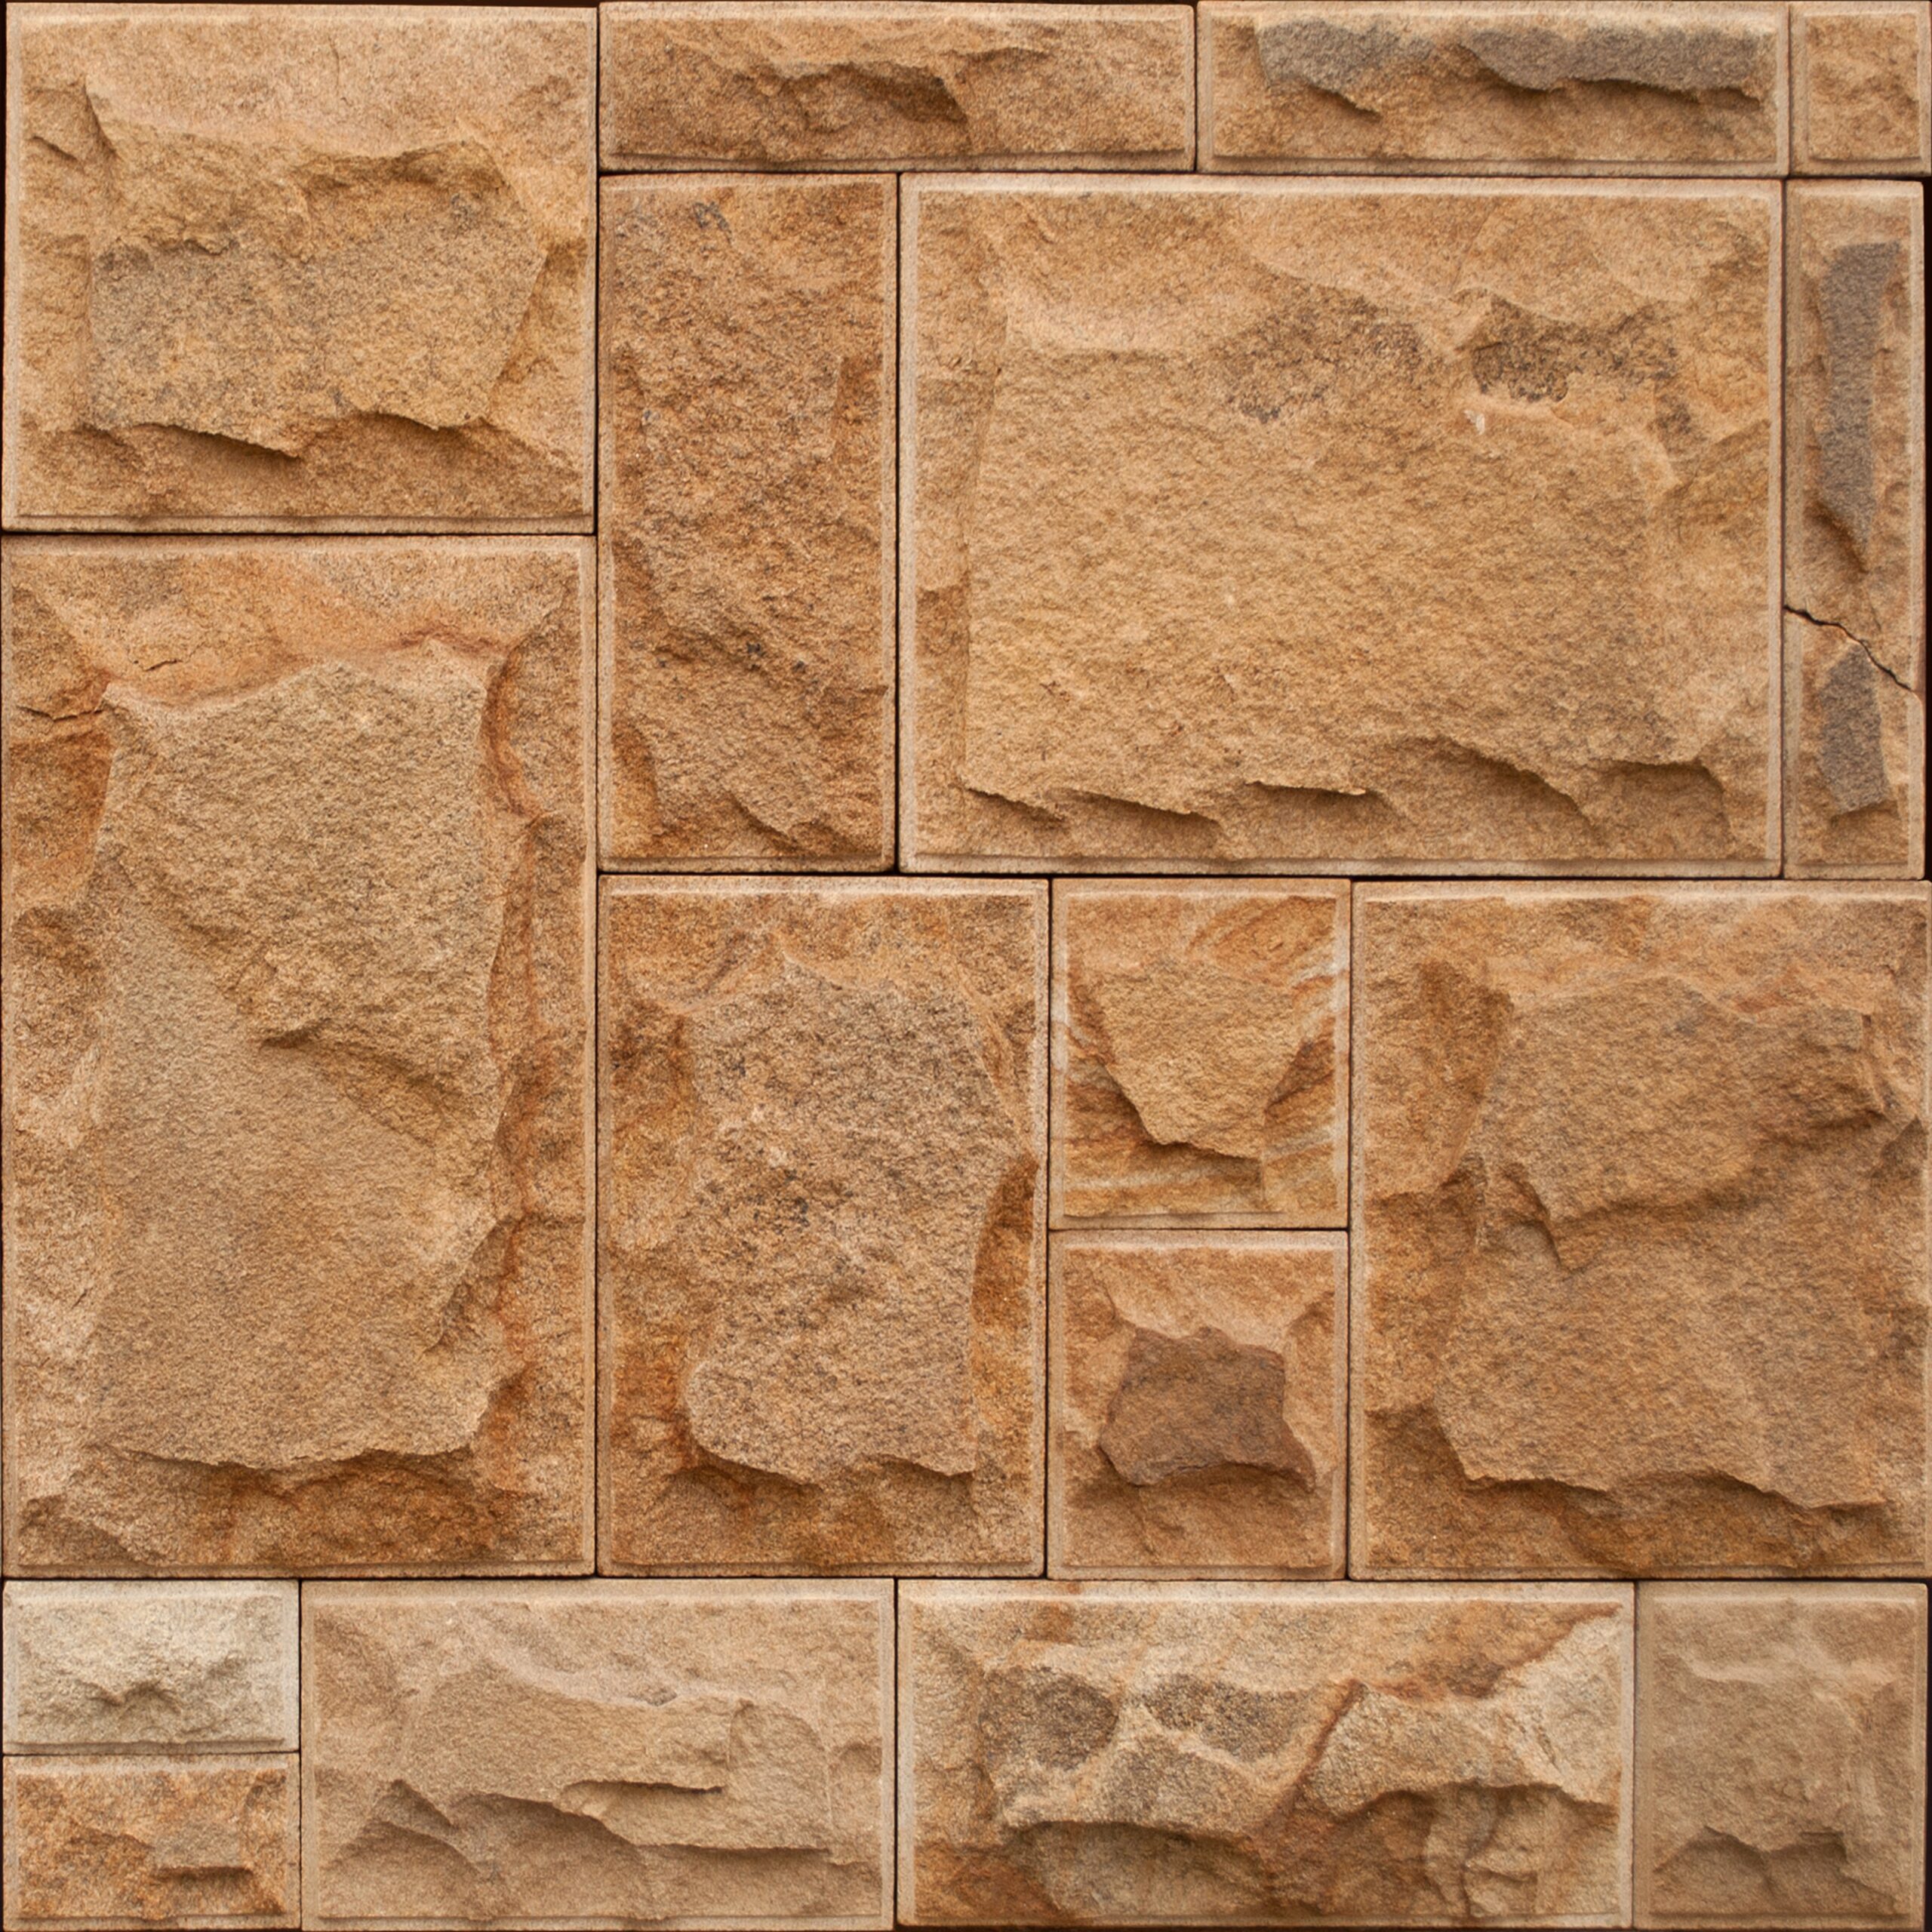 How Do Different Wall Textures Impact Your Home's Aesthetics